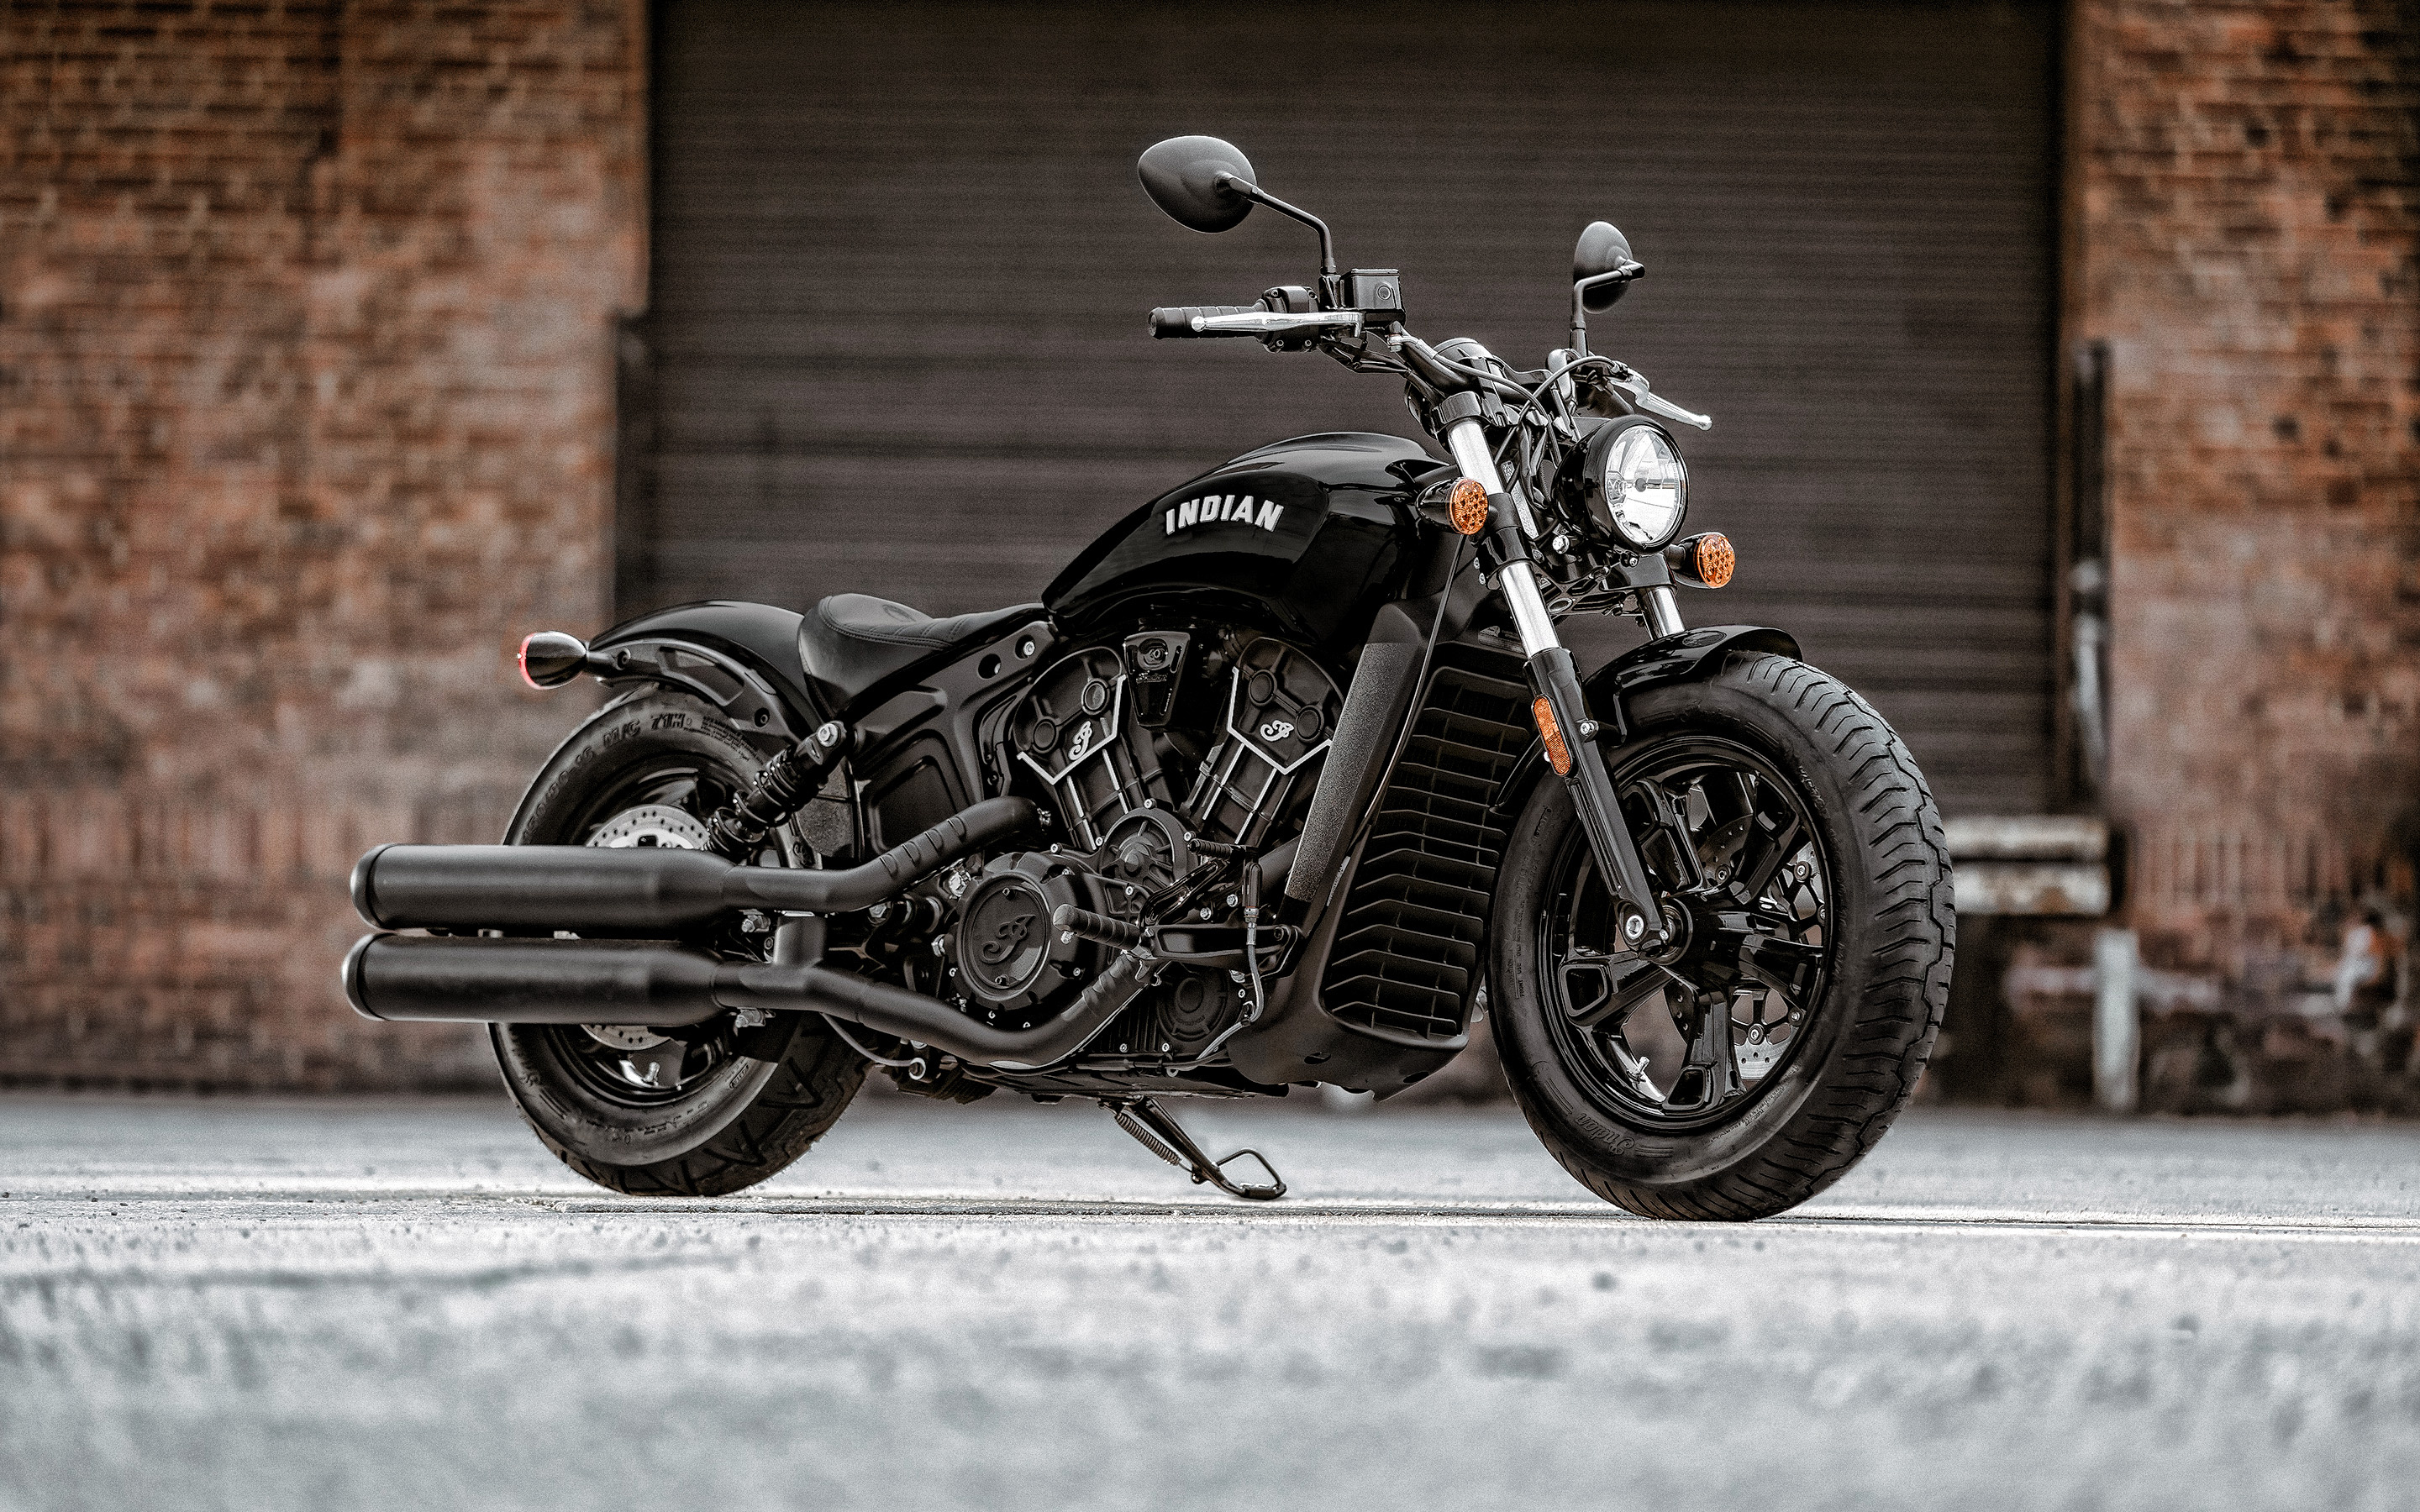 Indian Scout Bobber, Wallpaper download, Black motorcycle, High quality pictures, 2880x1800 HD Desktop